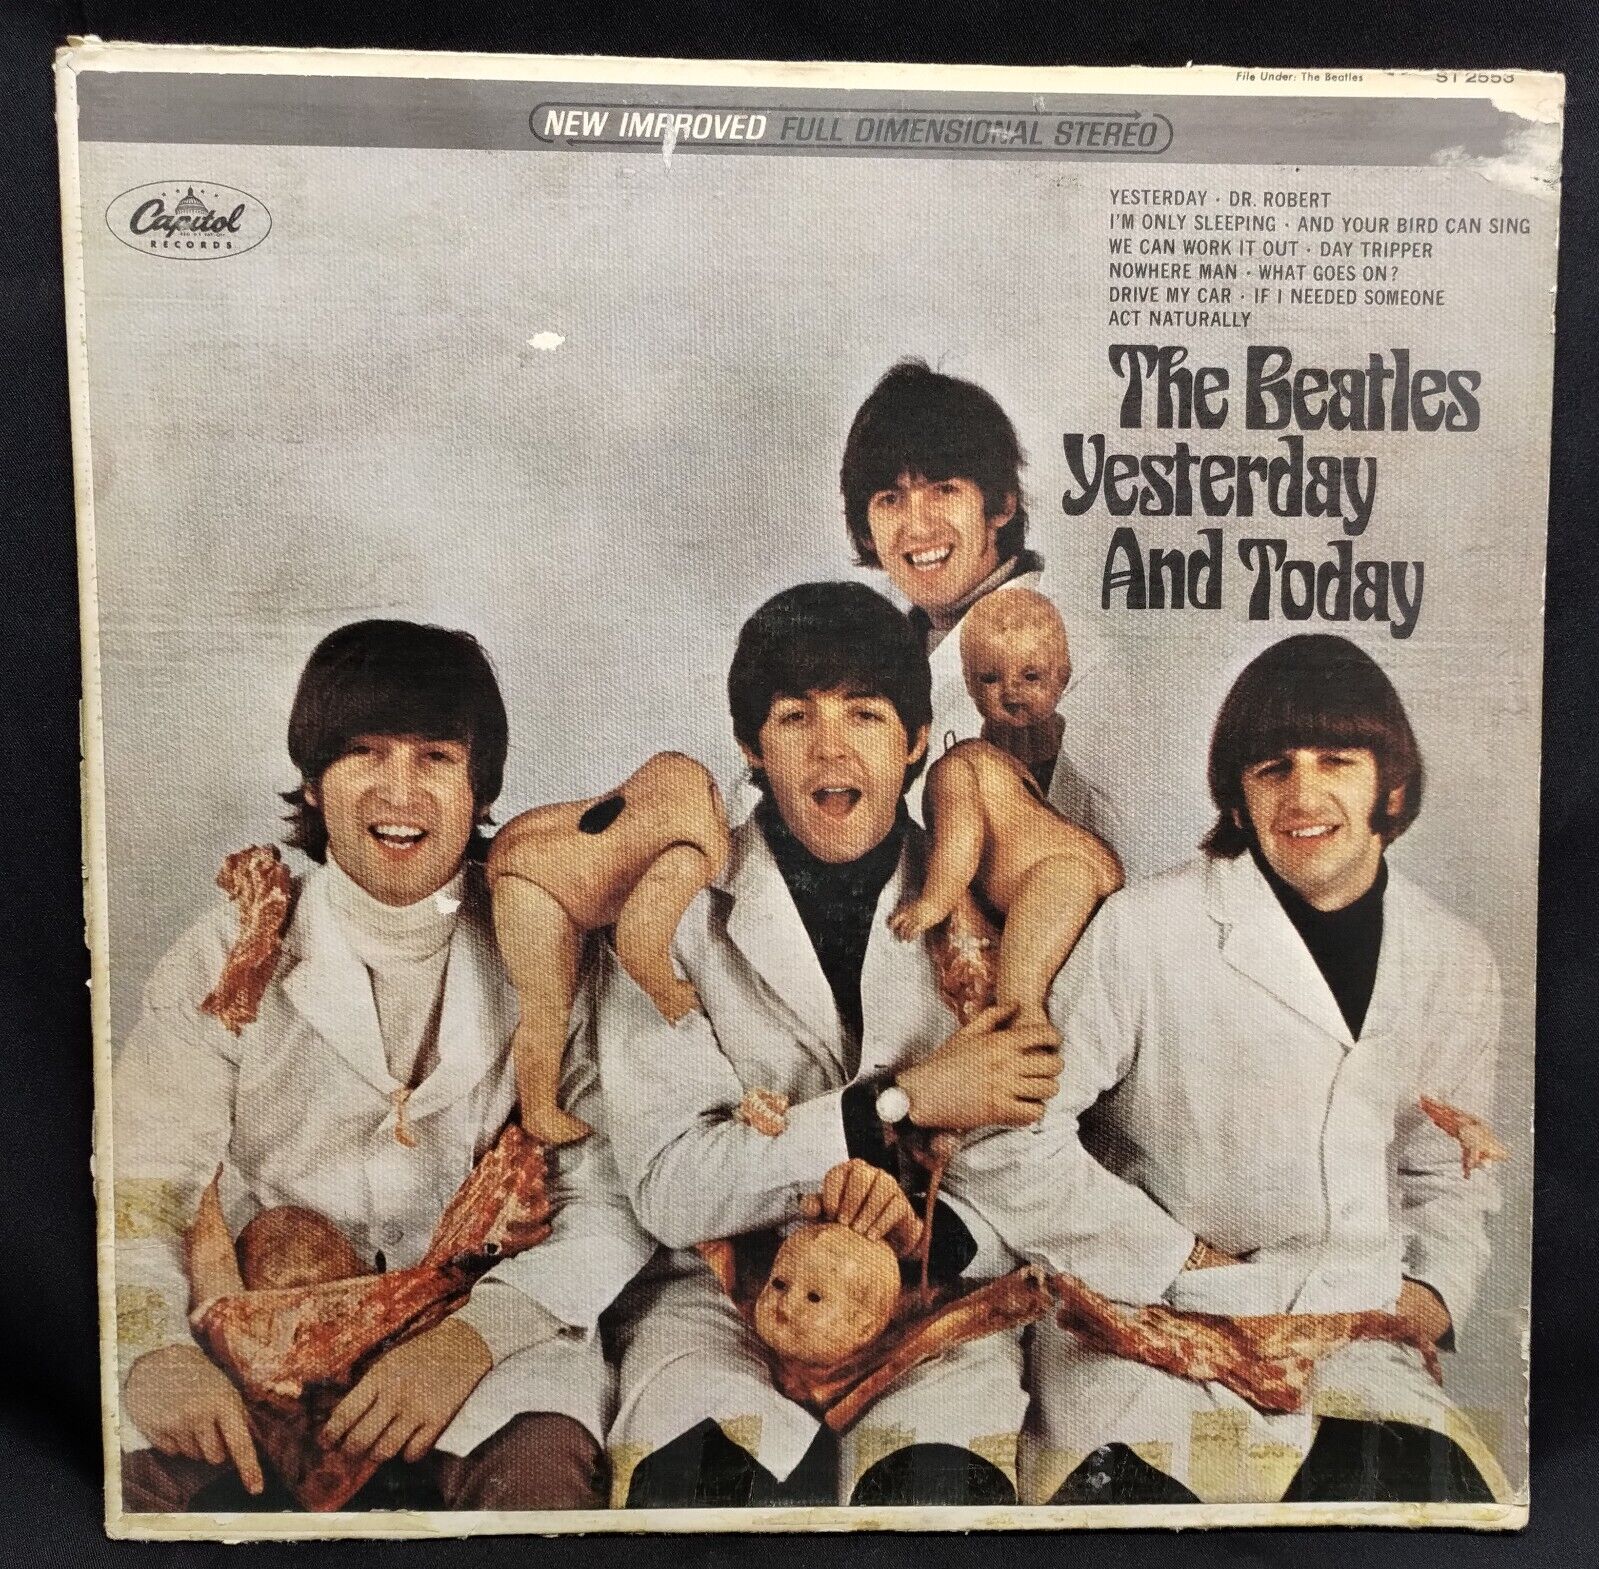 Original BEATLES Yesterday and Today BUTCHER COVER Lp Album Stereo Version